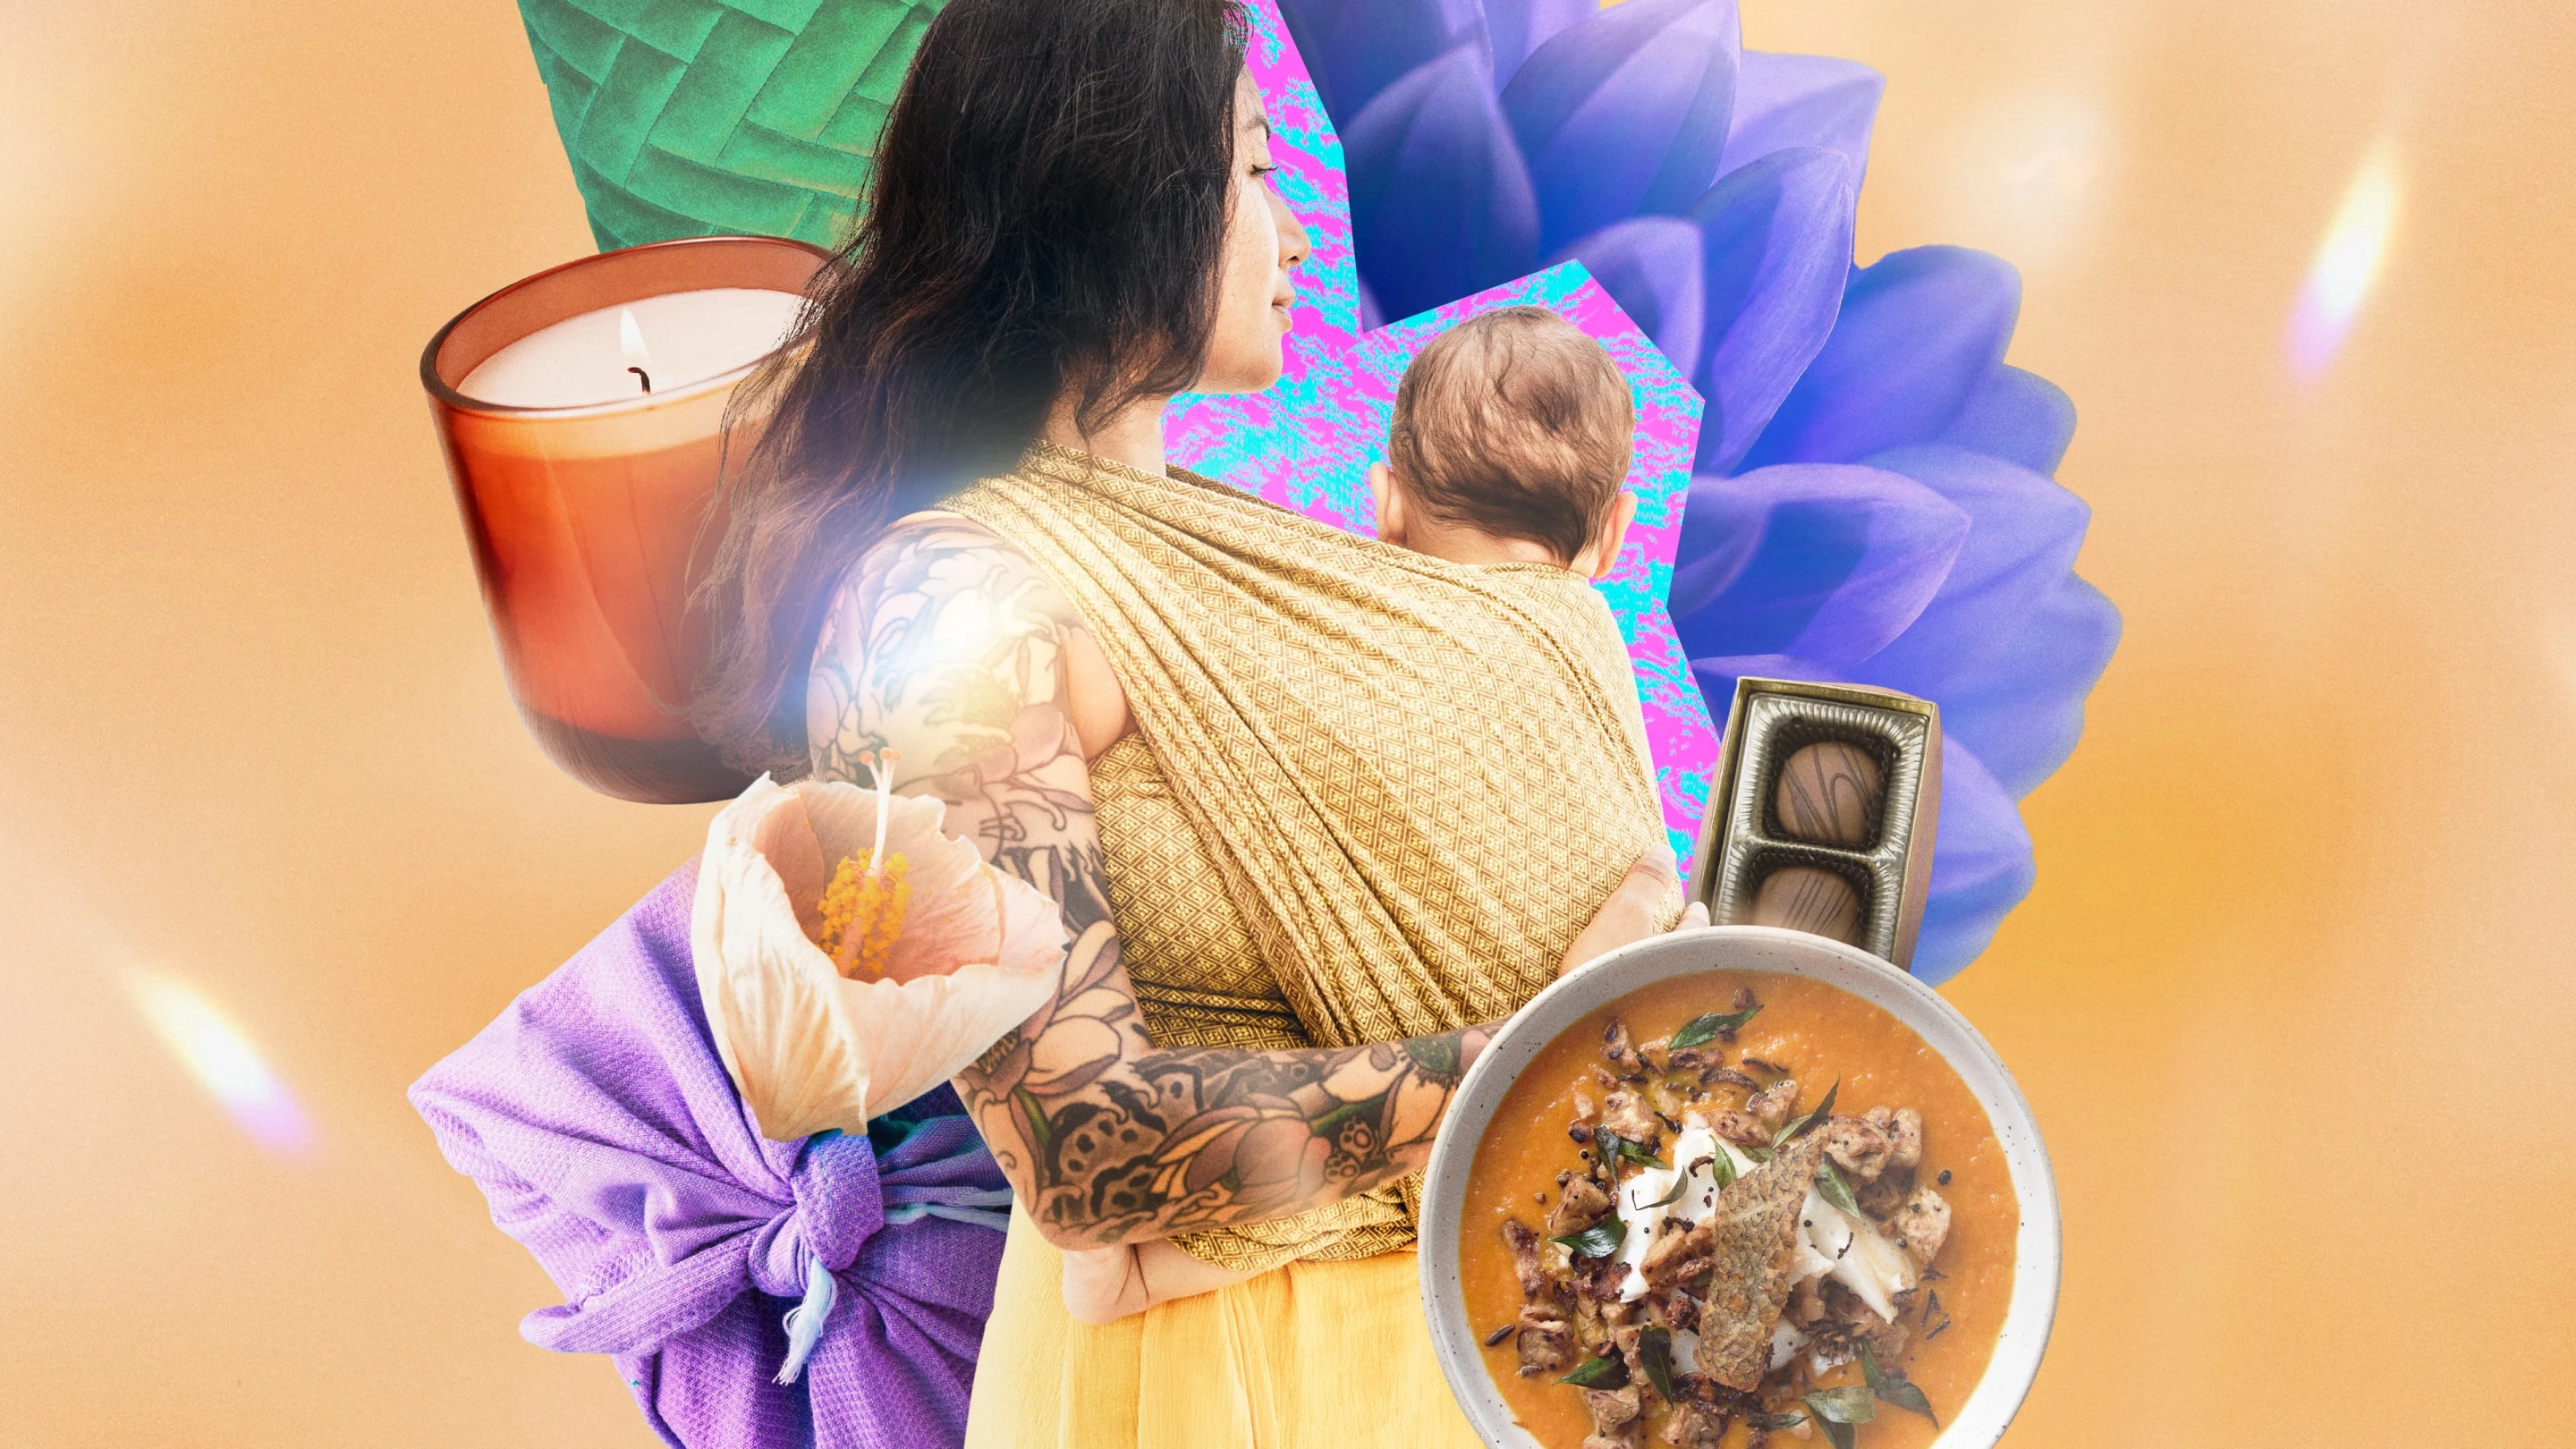 A woman with tattoos is carrying a baby with various items collaged around her, including a candle, flower petals, a box of chocolates, soup and blankets.